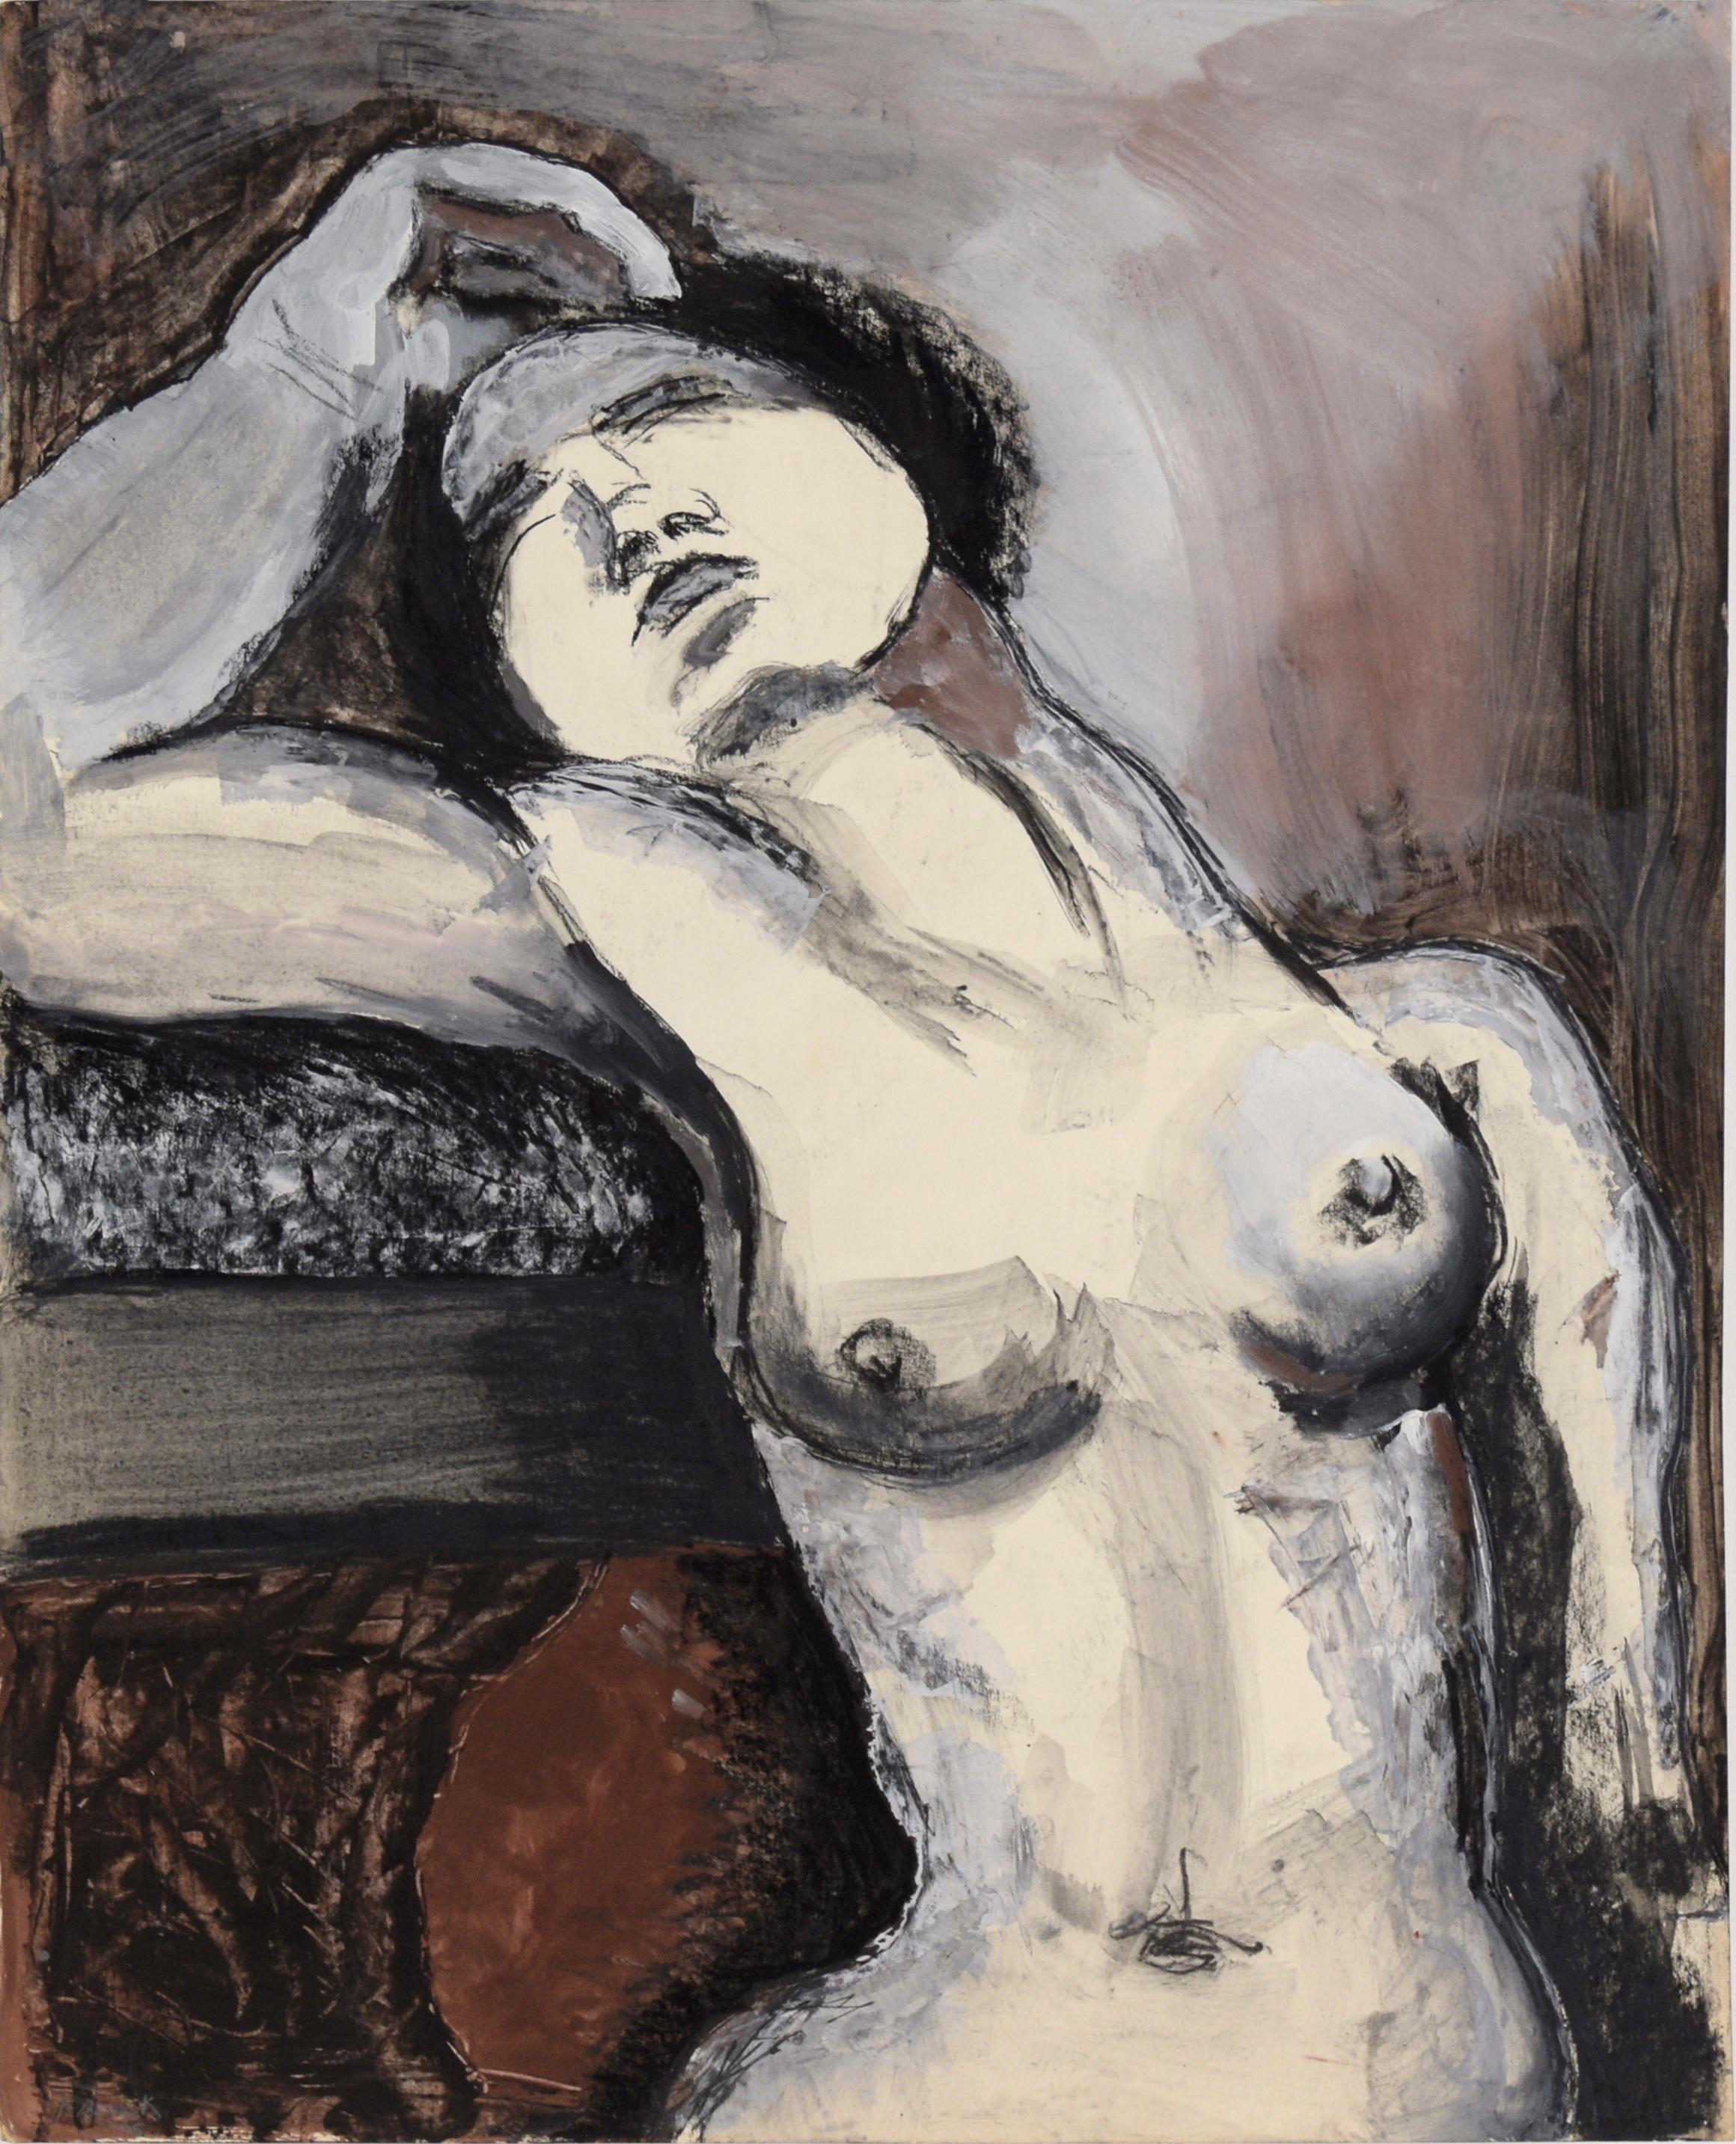 Katherine Kallick Figurative Painting - Black and White Nude Woman in Acrylic, Gouache, and Charcoal on Paper